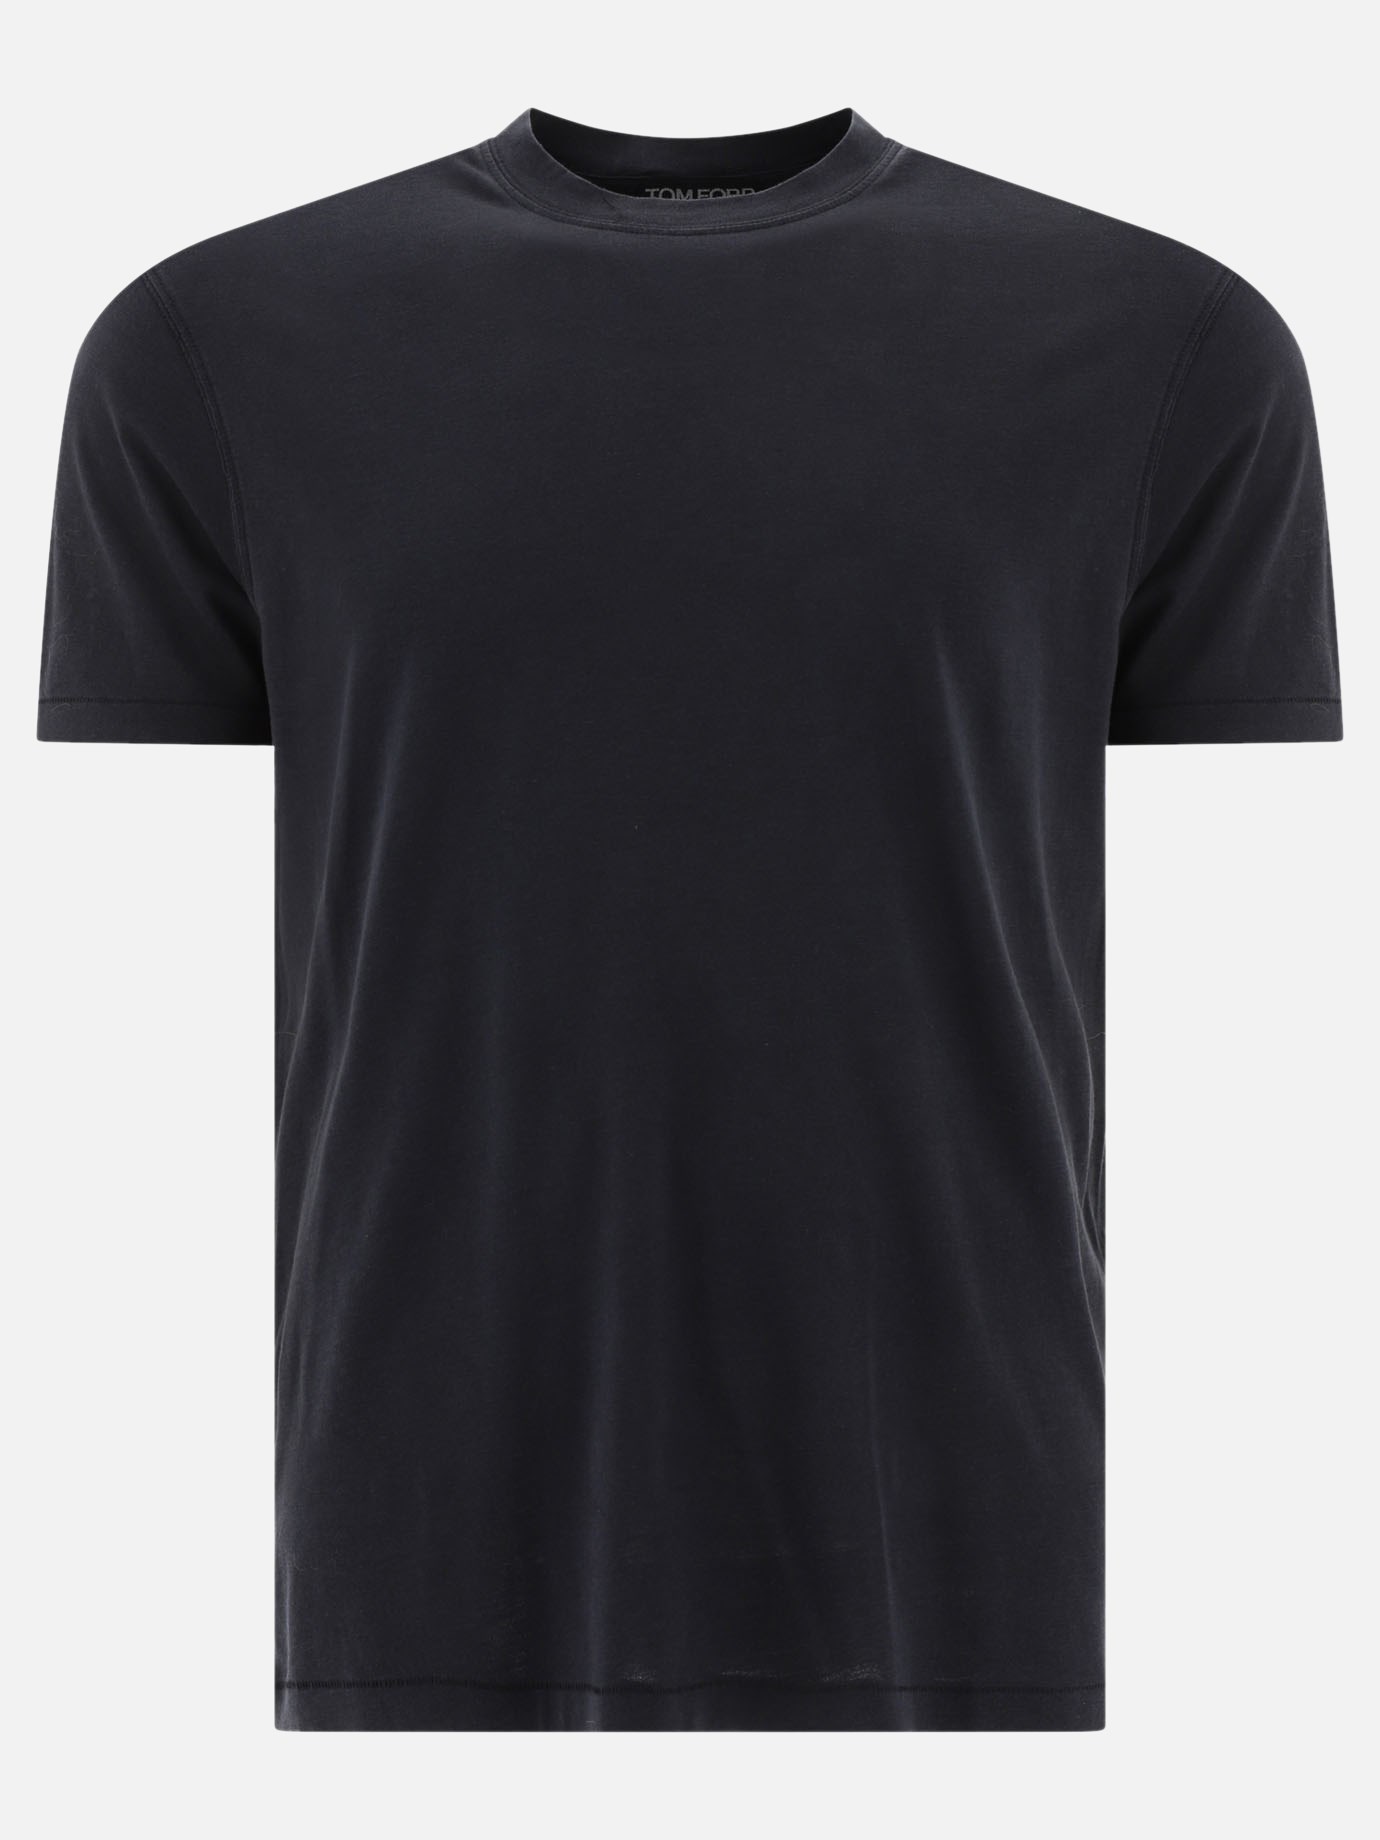  TF  t-shirt by Tom Ford